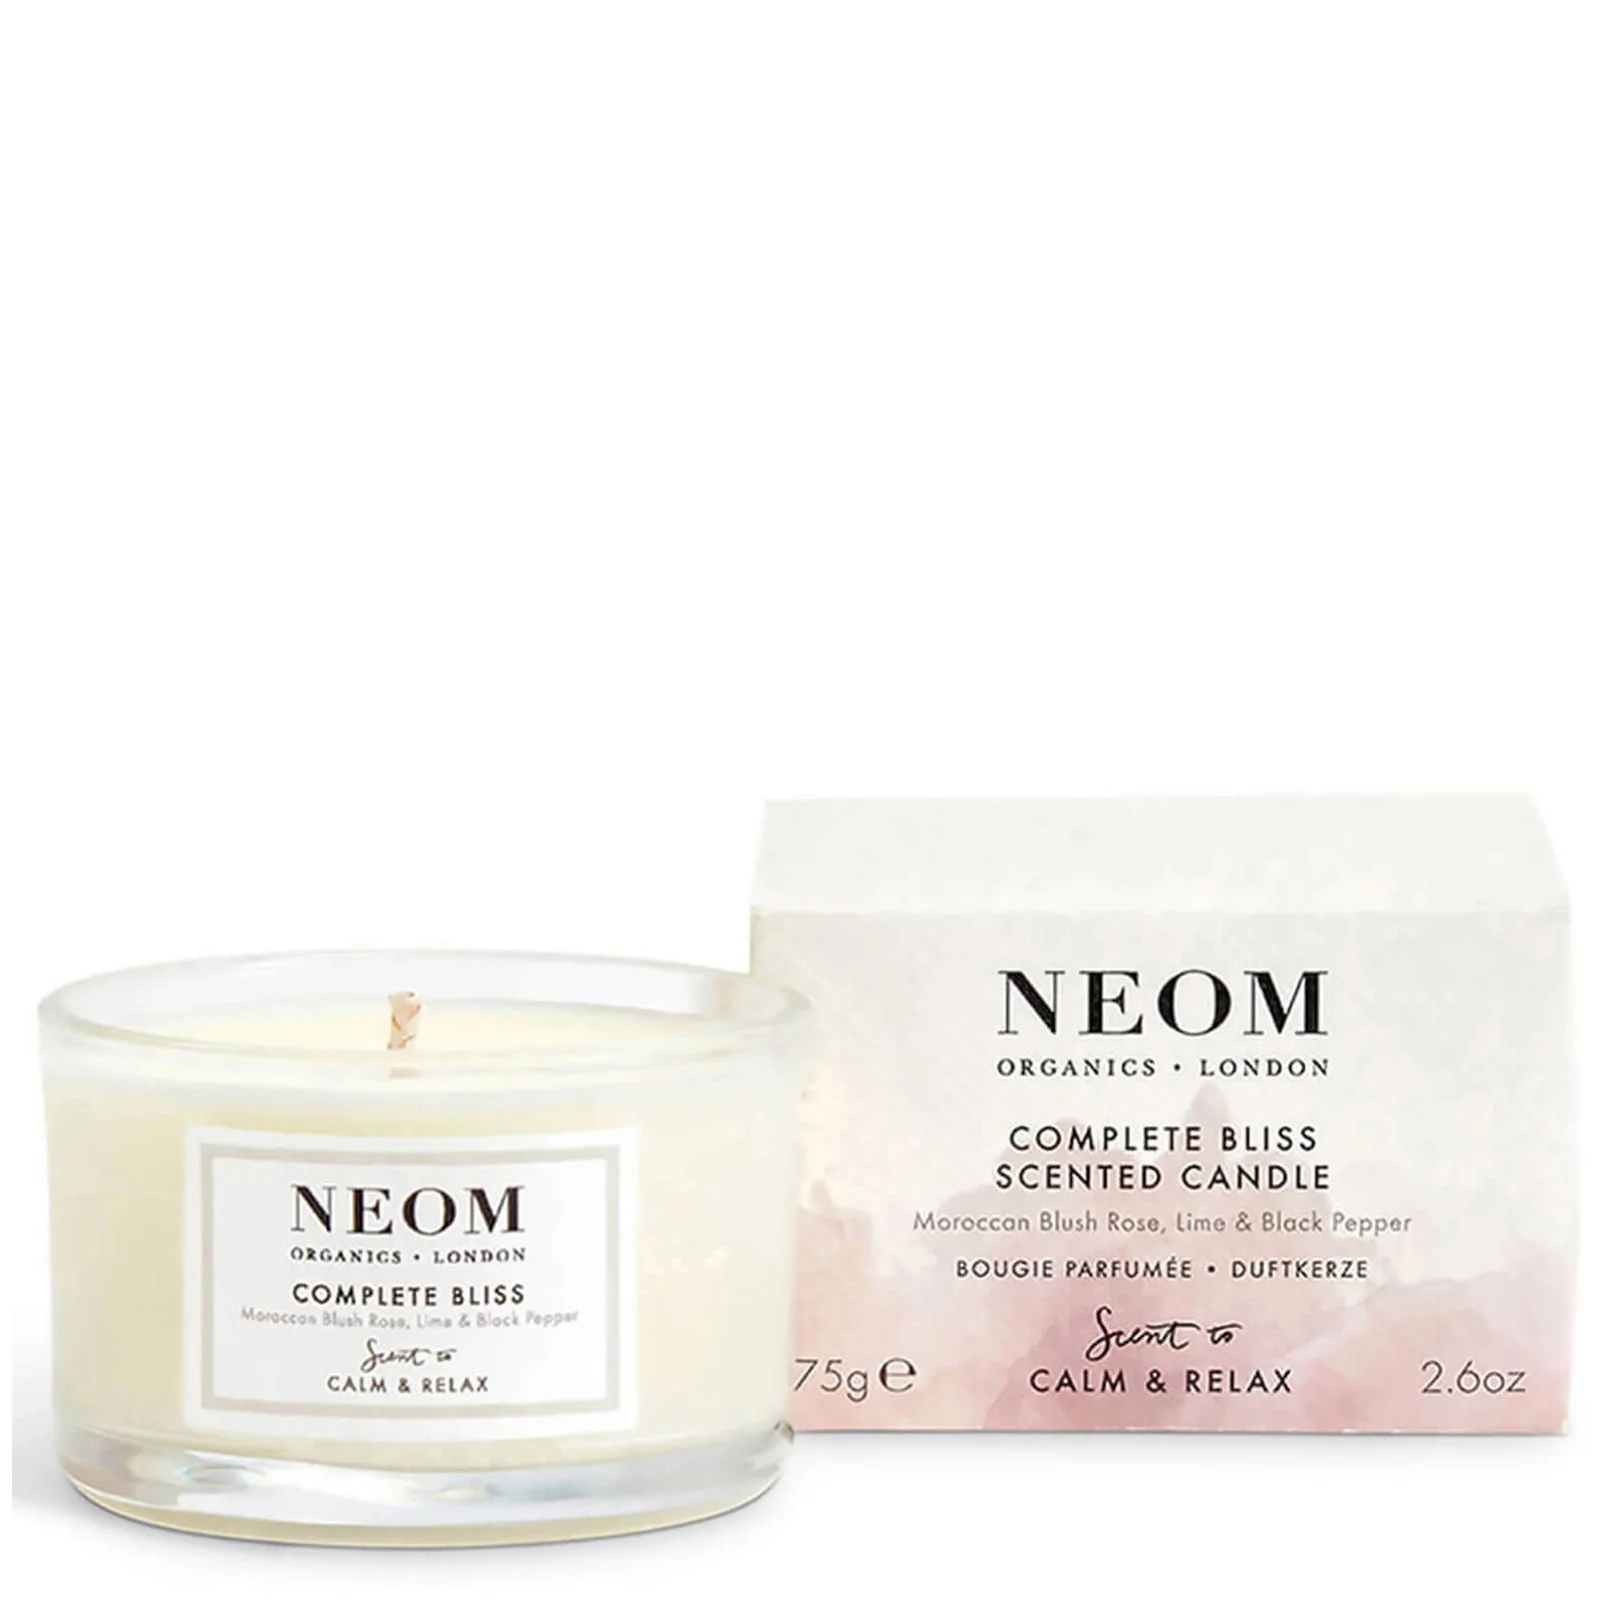 NEOM Complete Bliss Travel Scented Candle Image 1